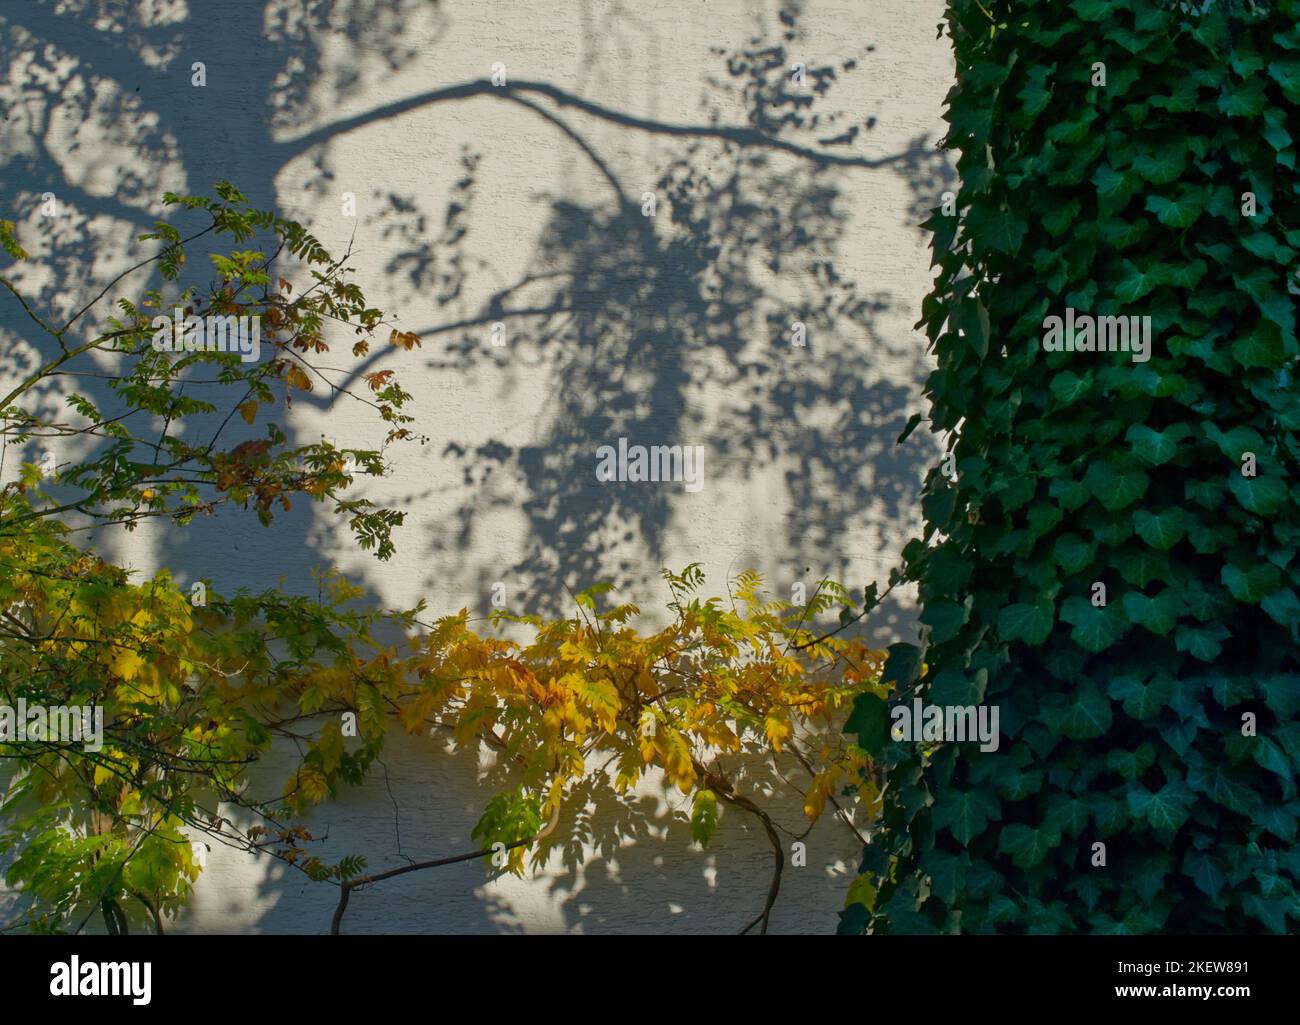 shadows of branches and leaves on a white wall, a horizontal branch with yellow leaves, and a green ivy-foliated trunk of a tree in the foreground Stock Photo